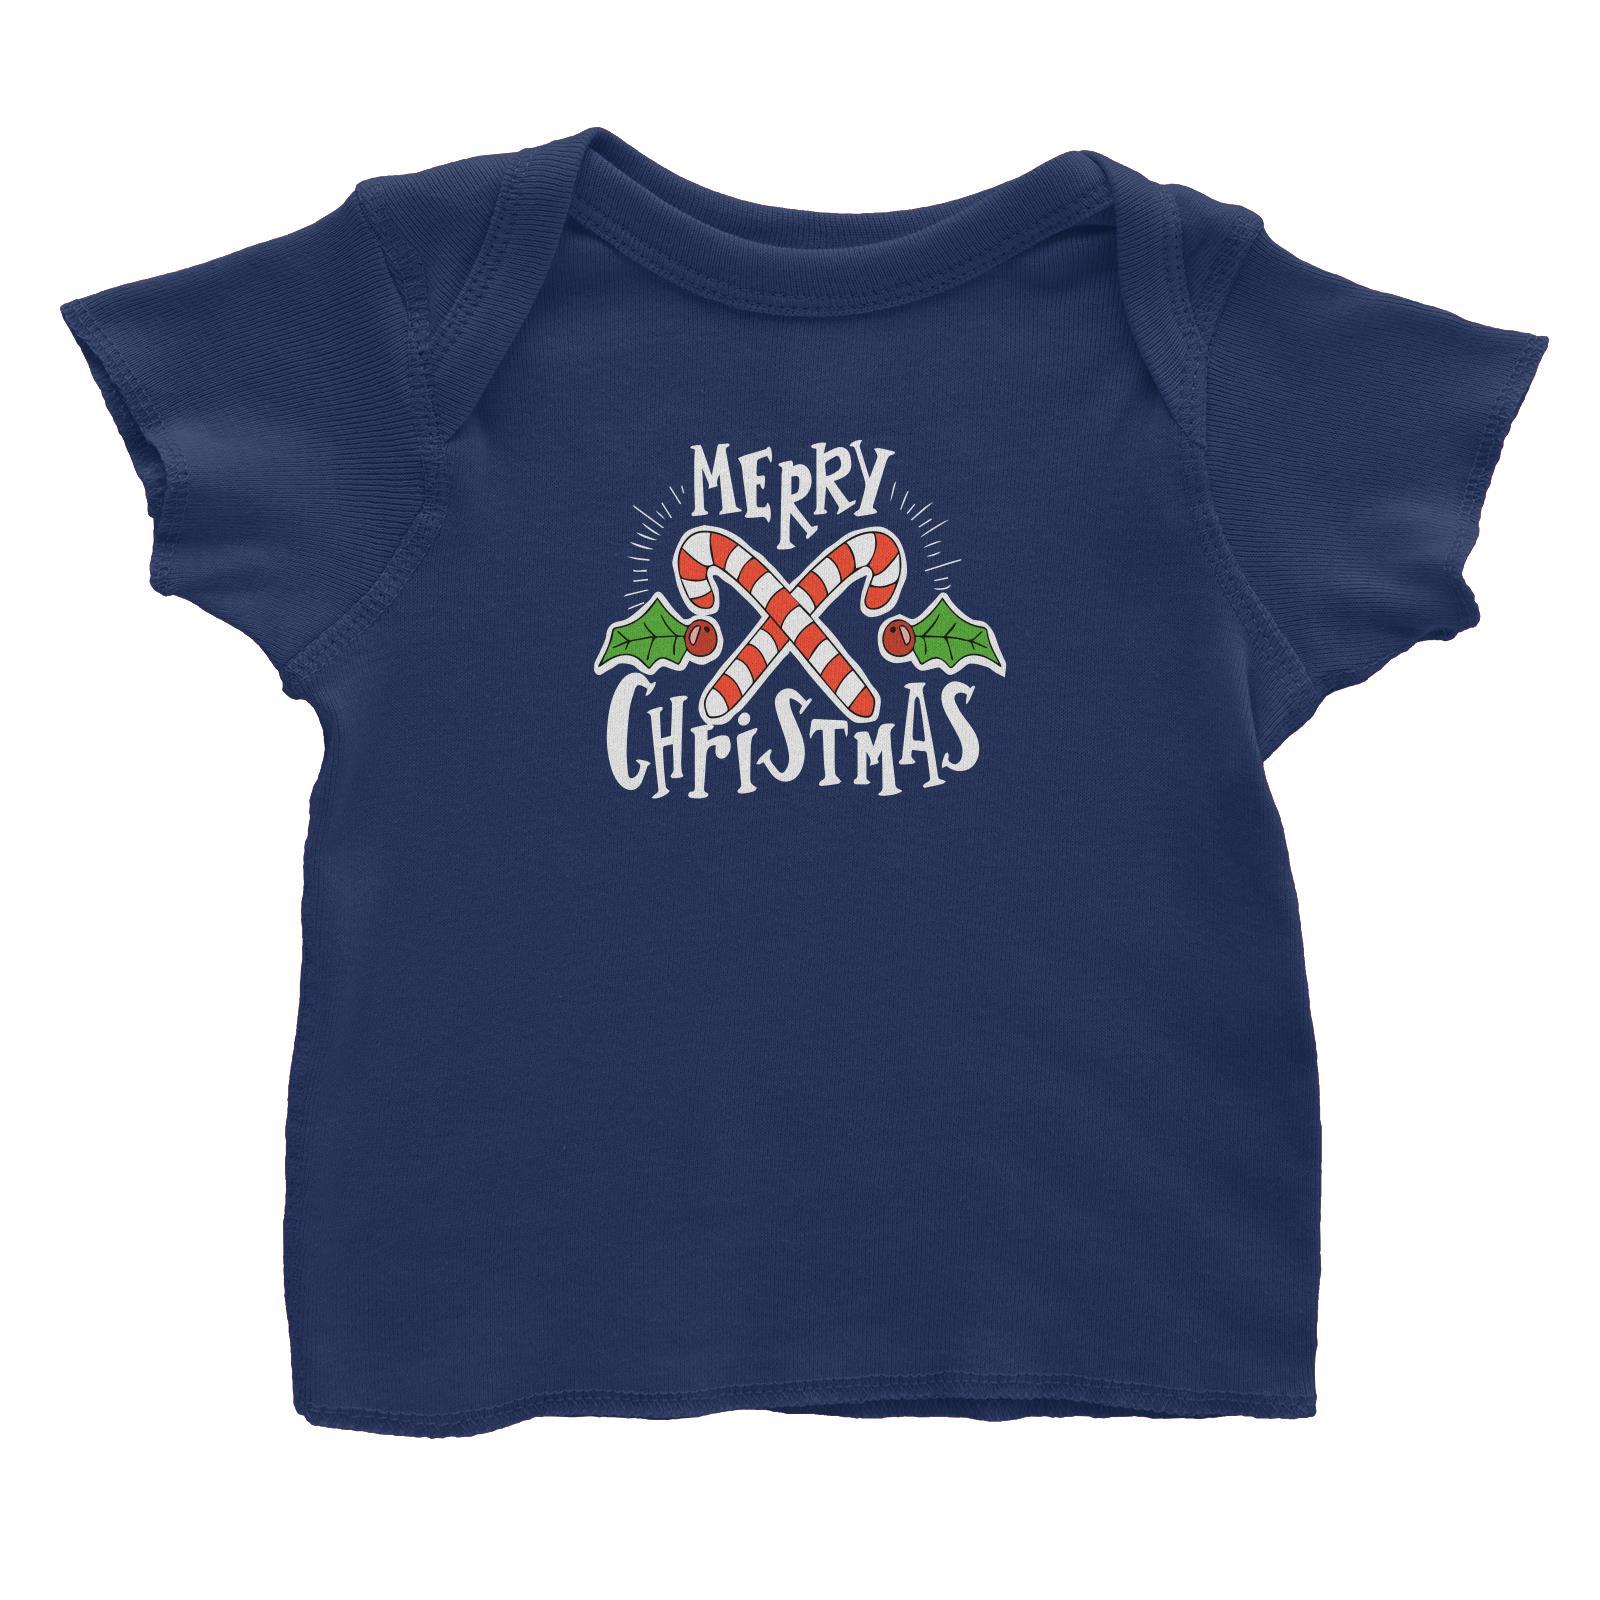 Merry Chrismas with Holly and Candy Cane Greeting Baby T-Shirt Christmas Matching Family Lettering